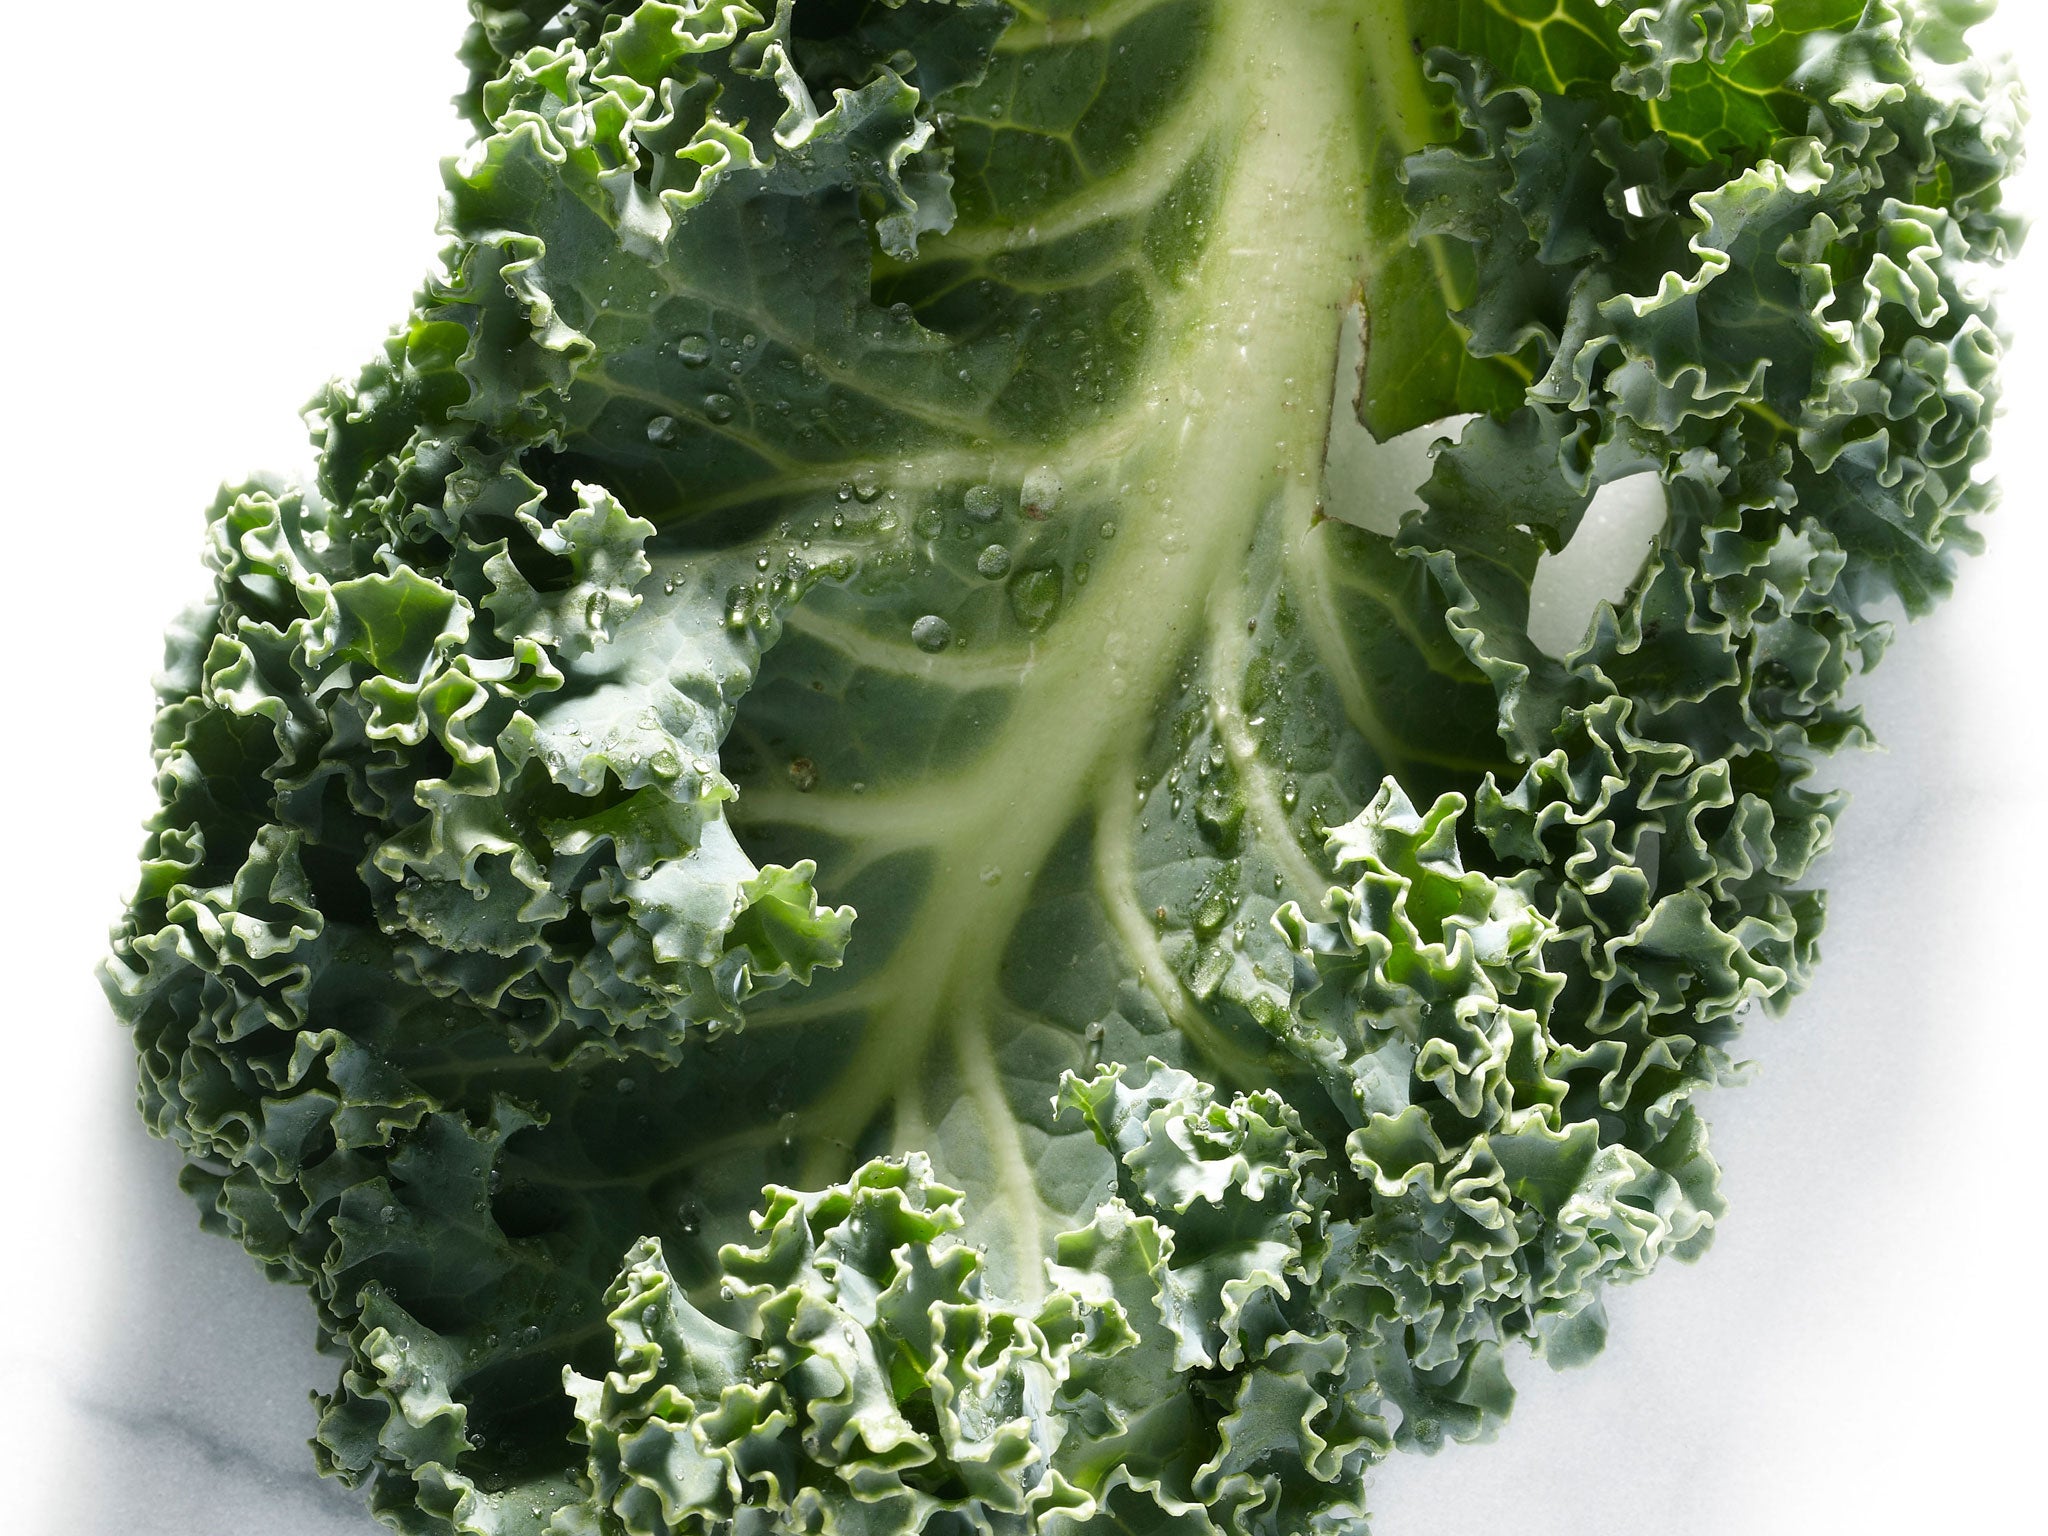 A kale leaf; the green vegetable is enjoying a newfound popularity